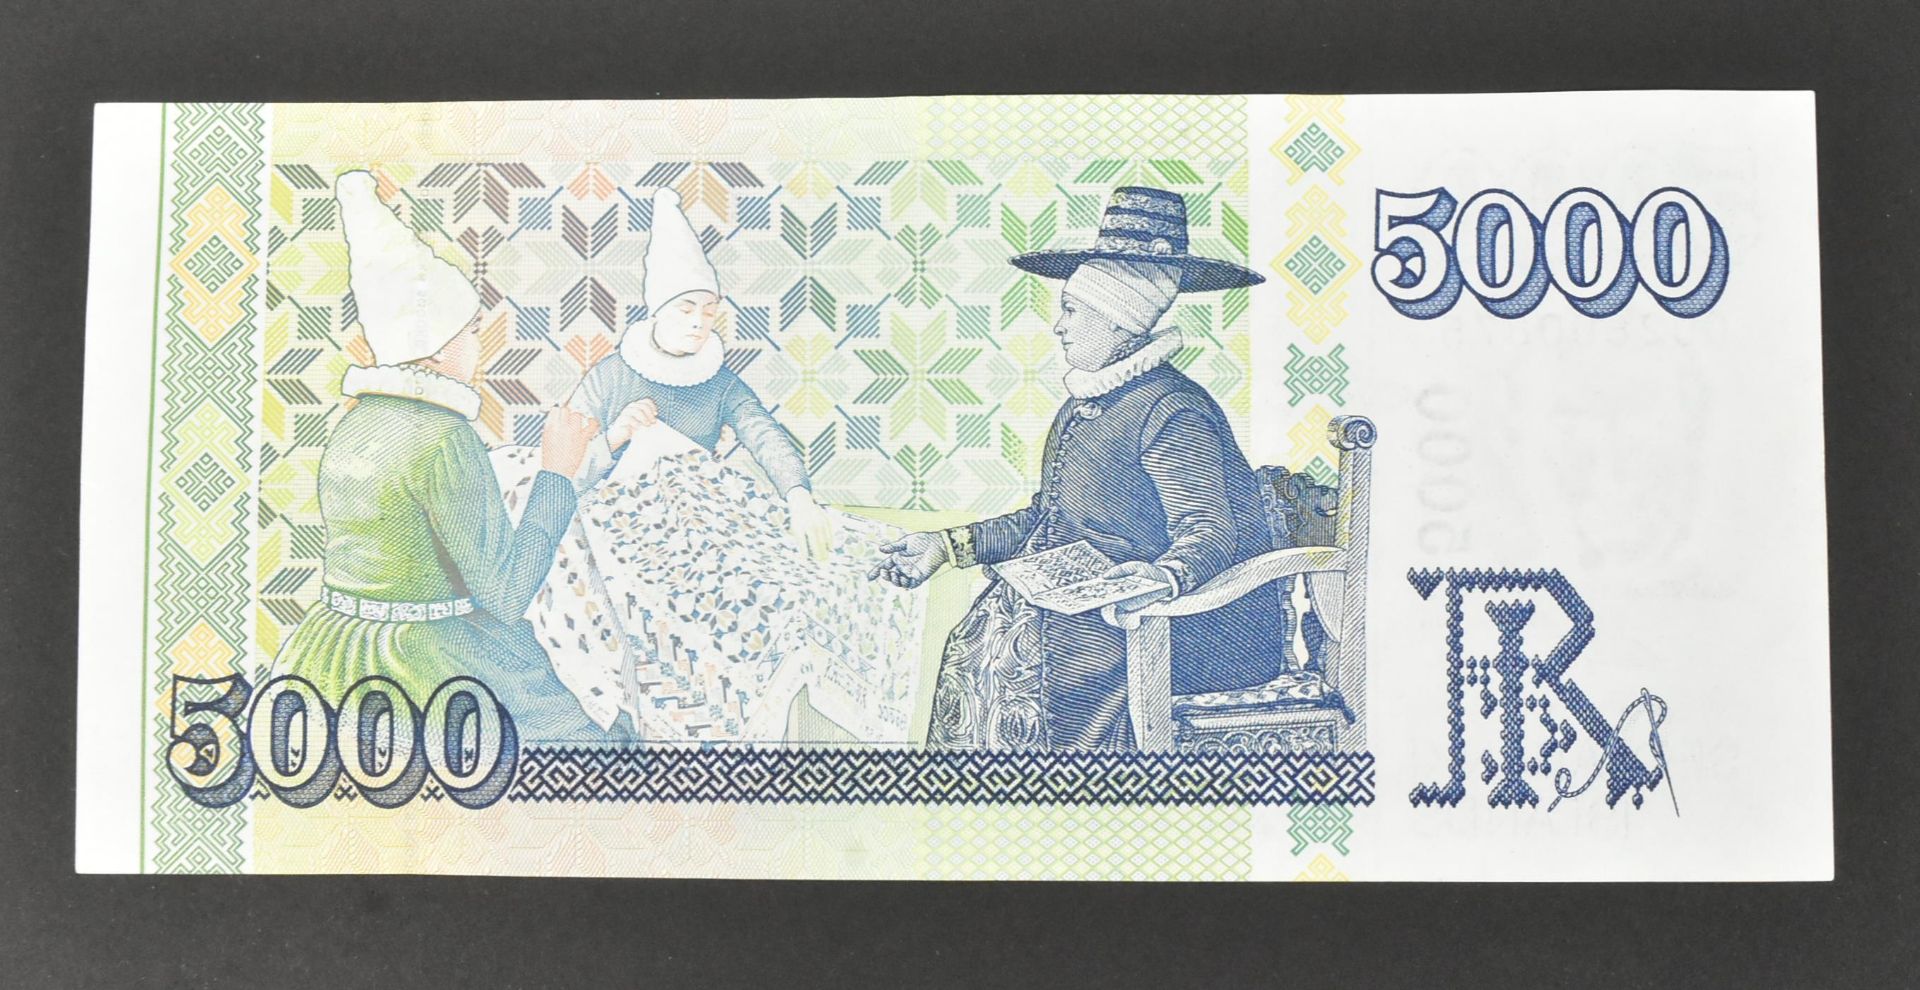 COLLECTION OF UNCIRCULATED BANK NOTES - EUROPEAN - Image 6 of 44